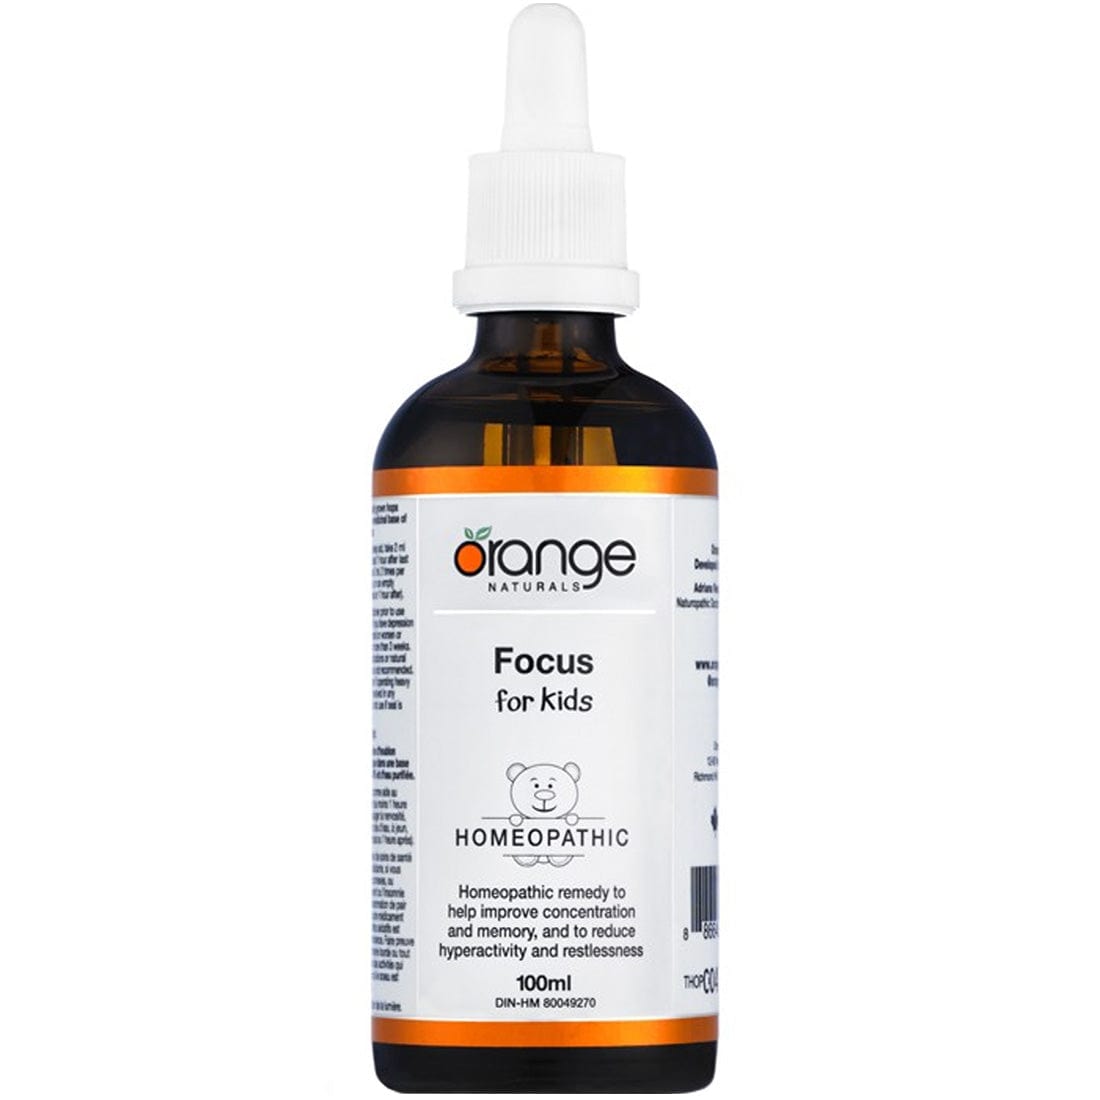 Orange Naturals Focus (for kids) Homeopathic Remedy, 100ml